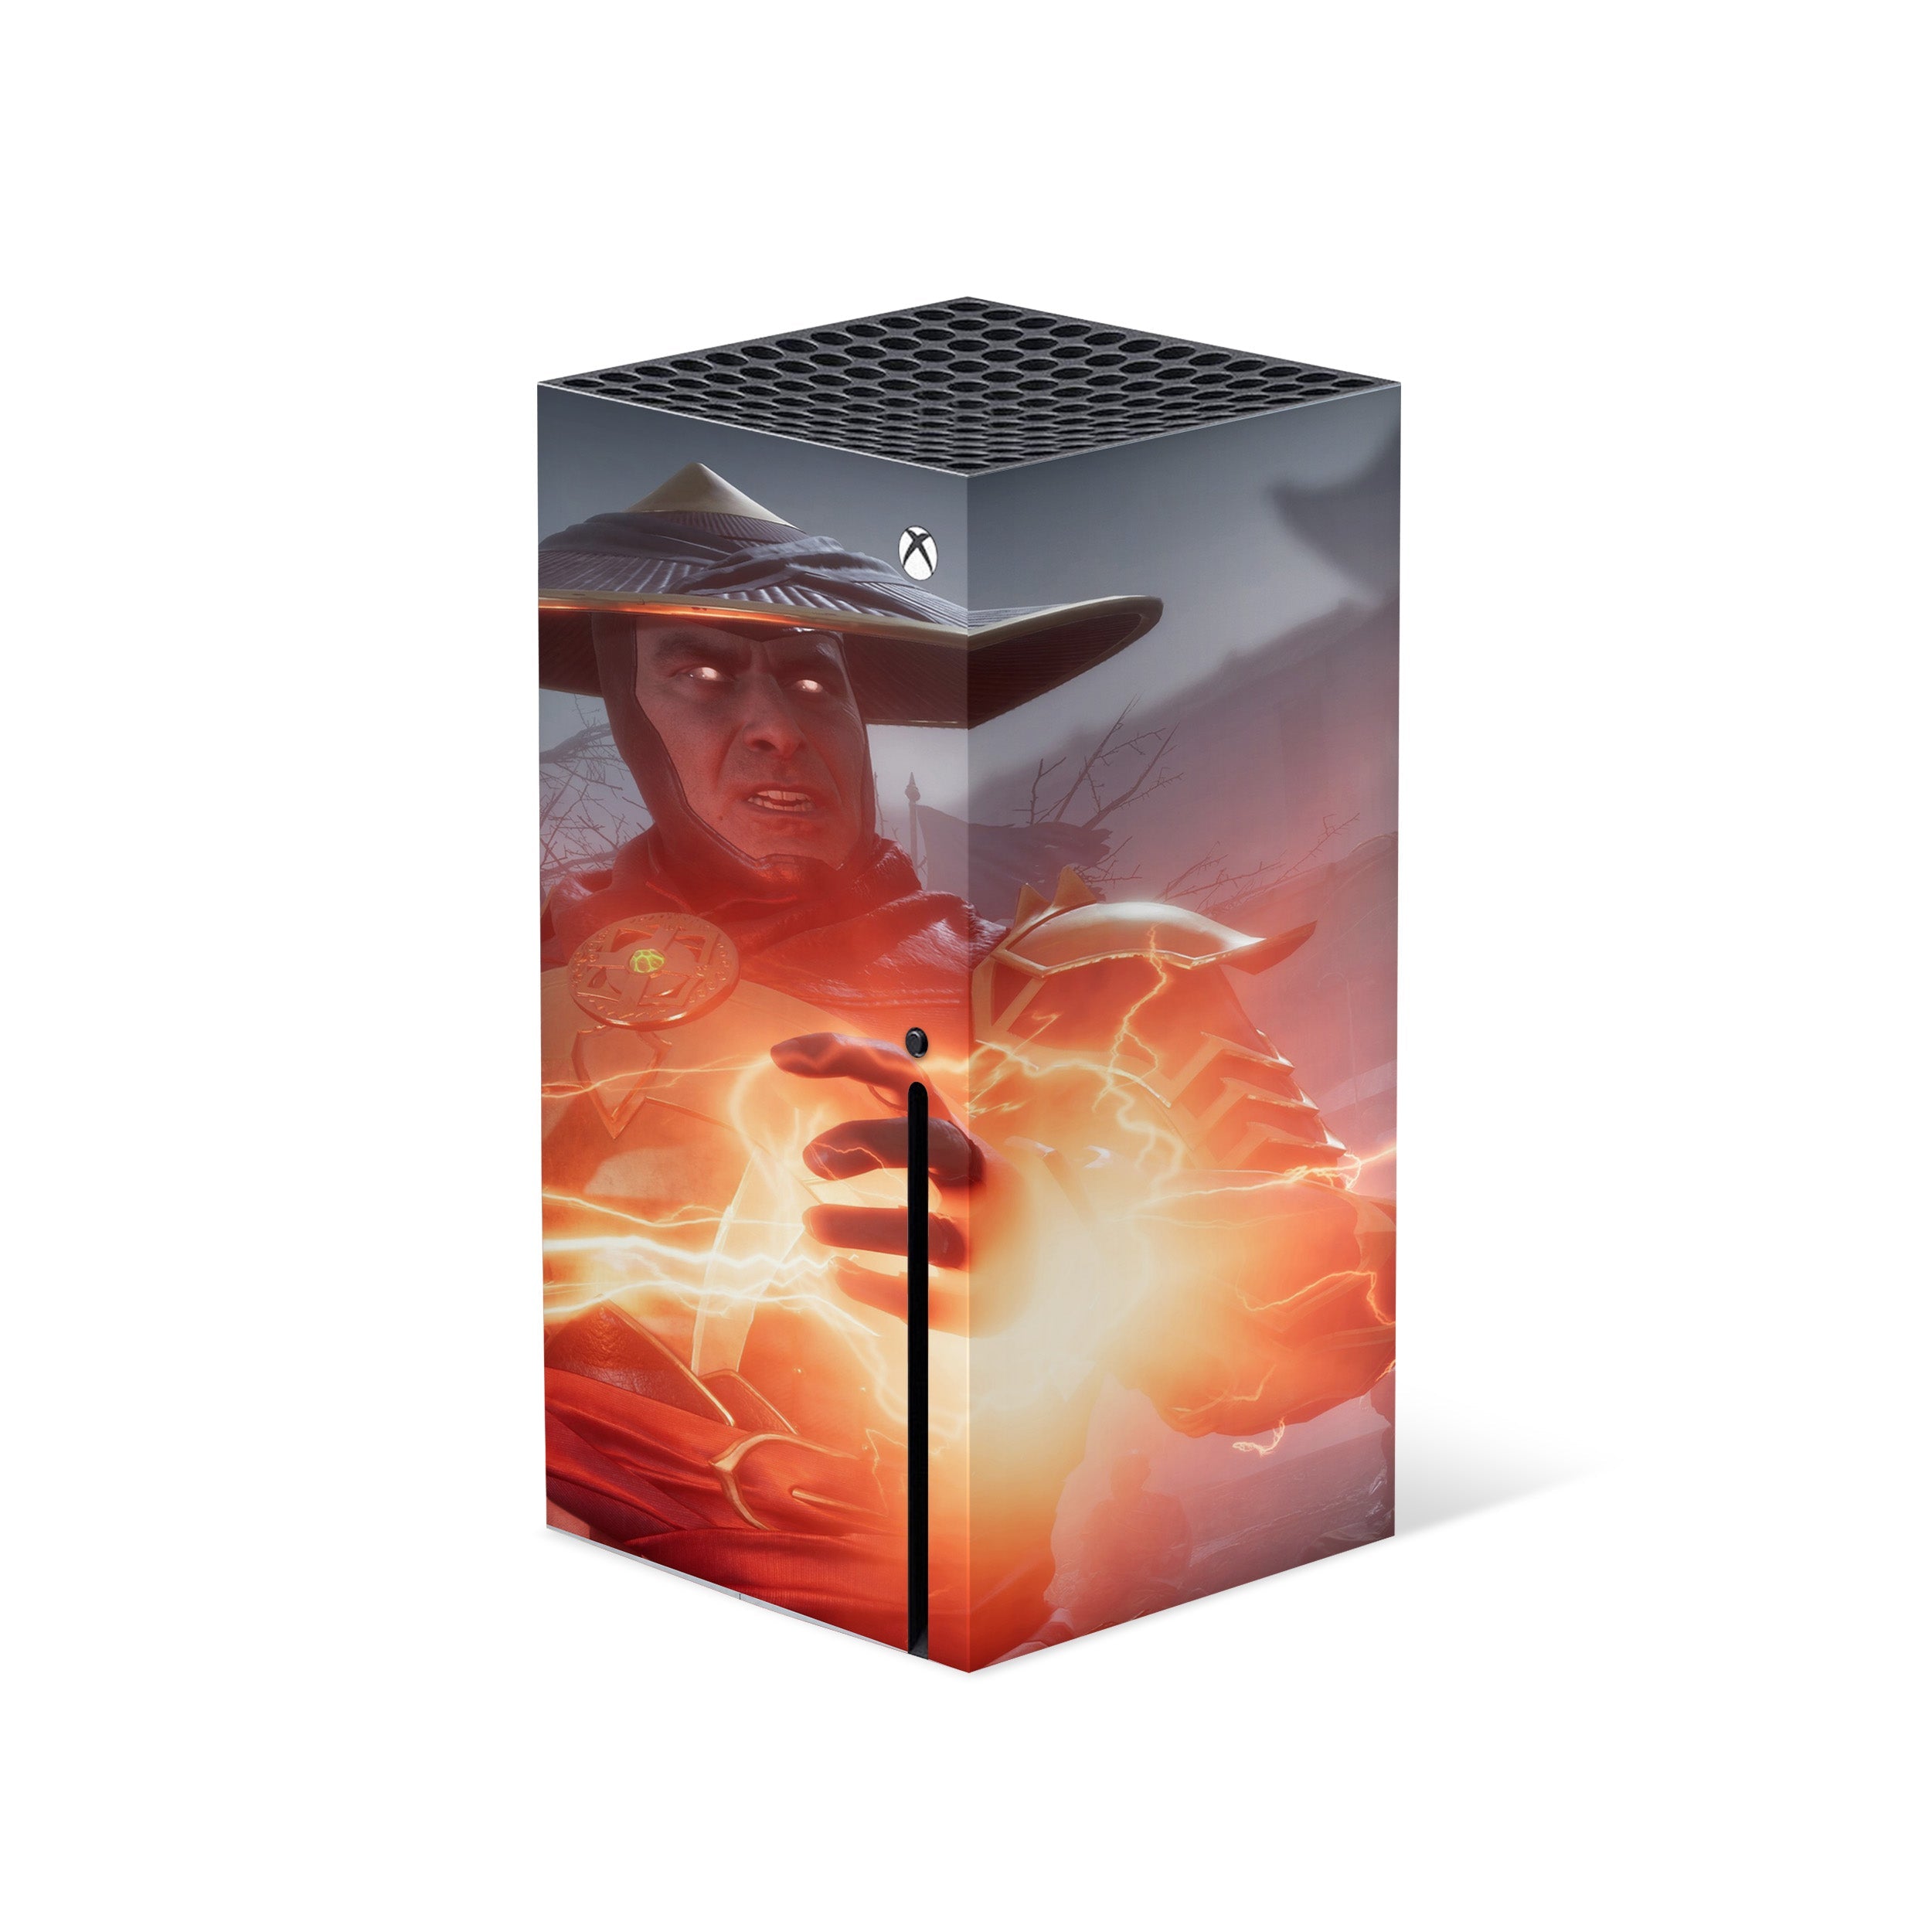 A video game skin featuring a Mortal Kombat 11 Raiden design for the Xbox Series X.